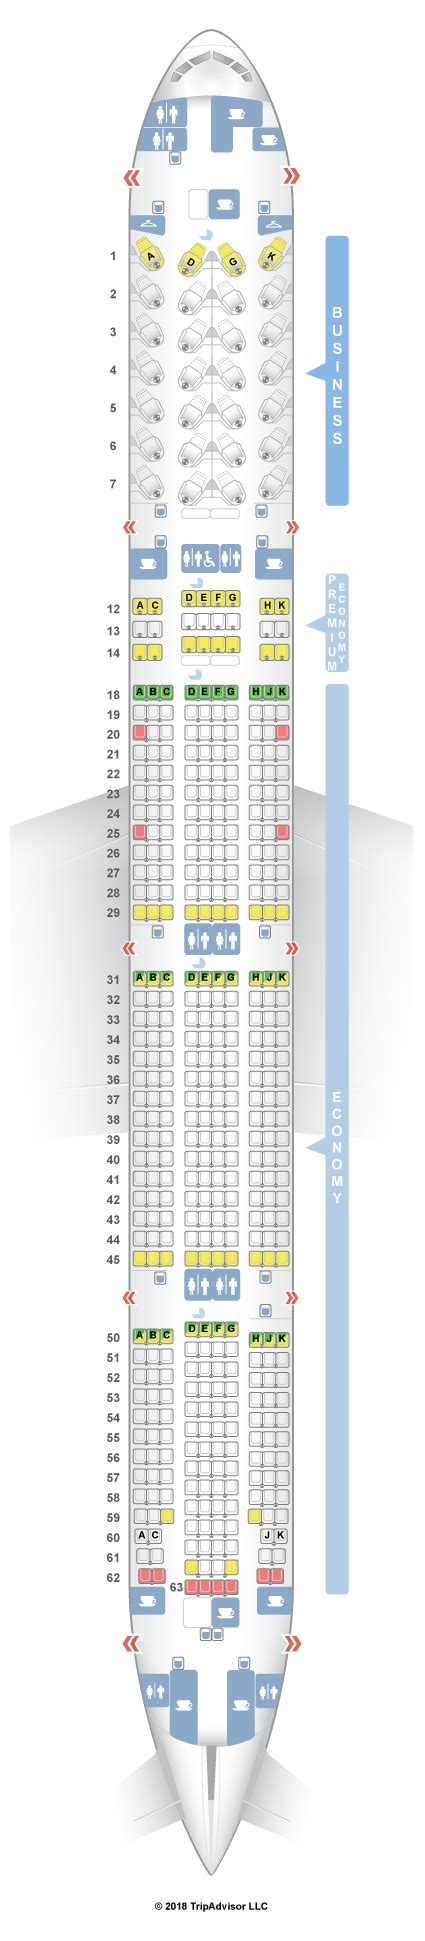 boeing 777-300er seating chart air canada